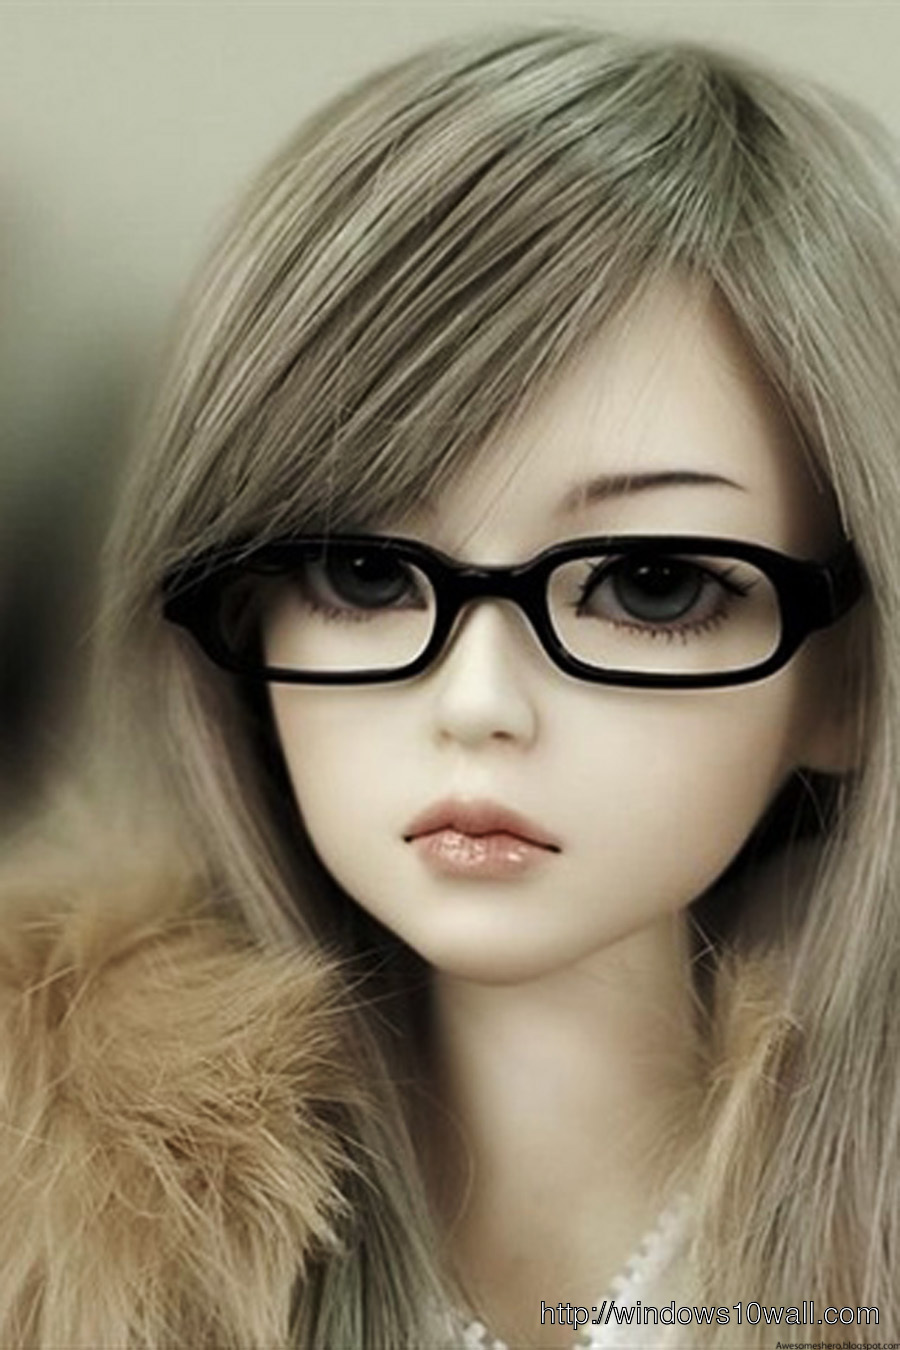 New doll image download for mobile n iphone